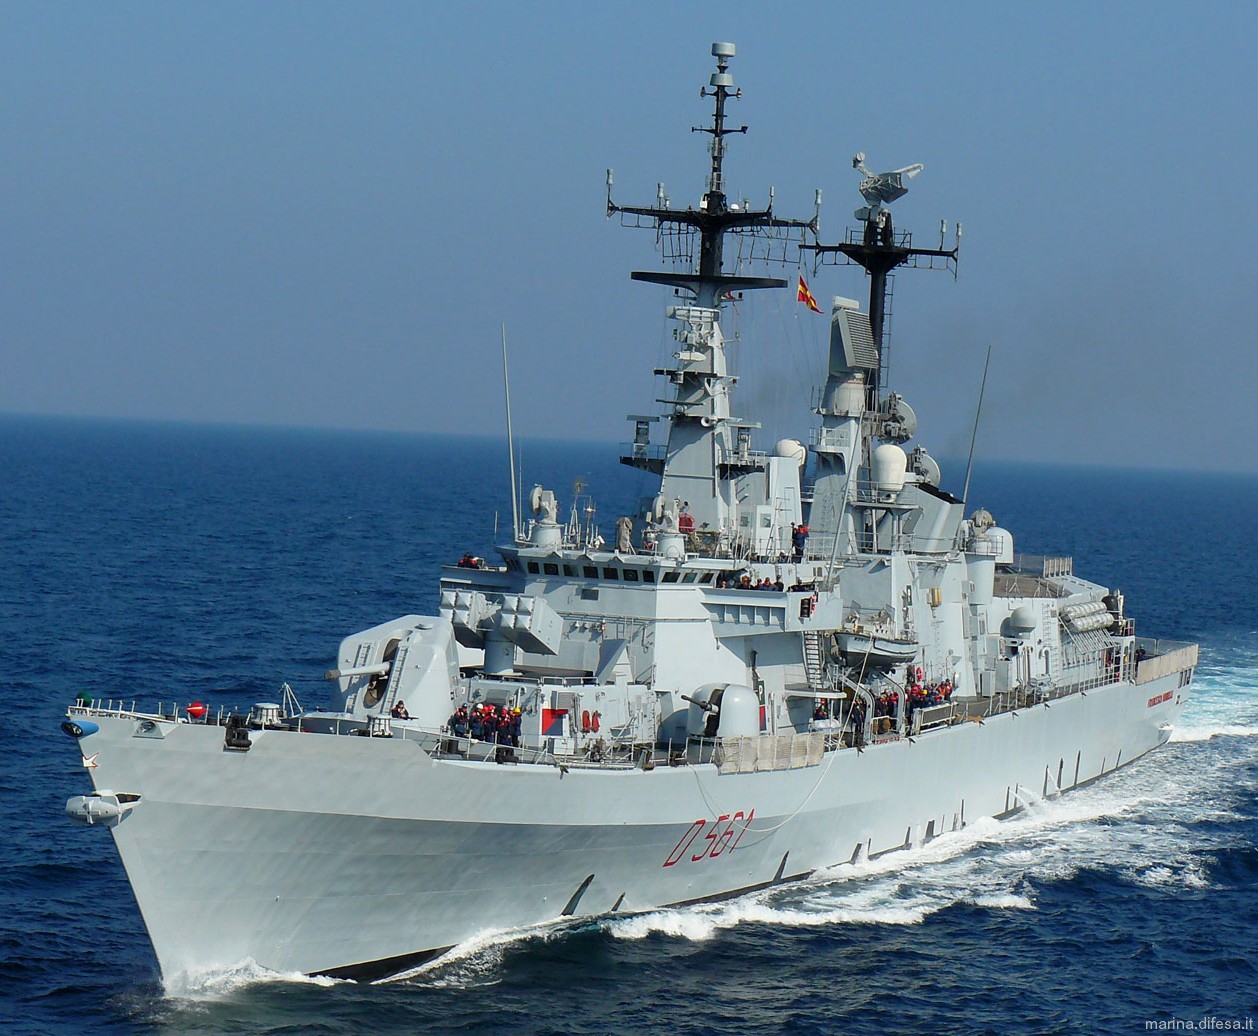 d-561 francesco mimbelli its nave guided missile destroyer ddg italian navy marina militare 05